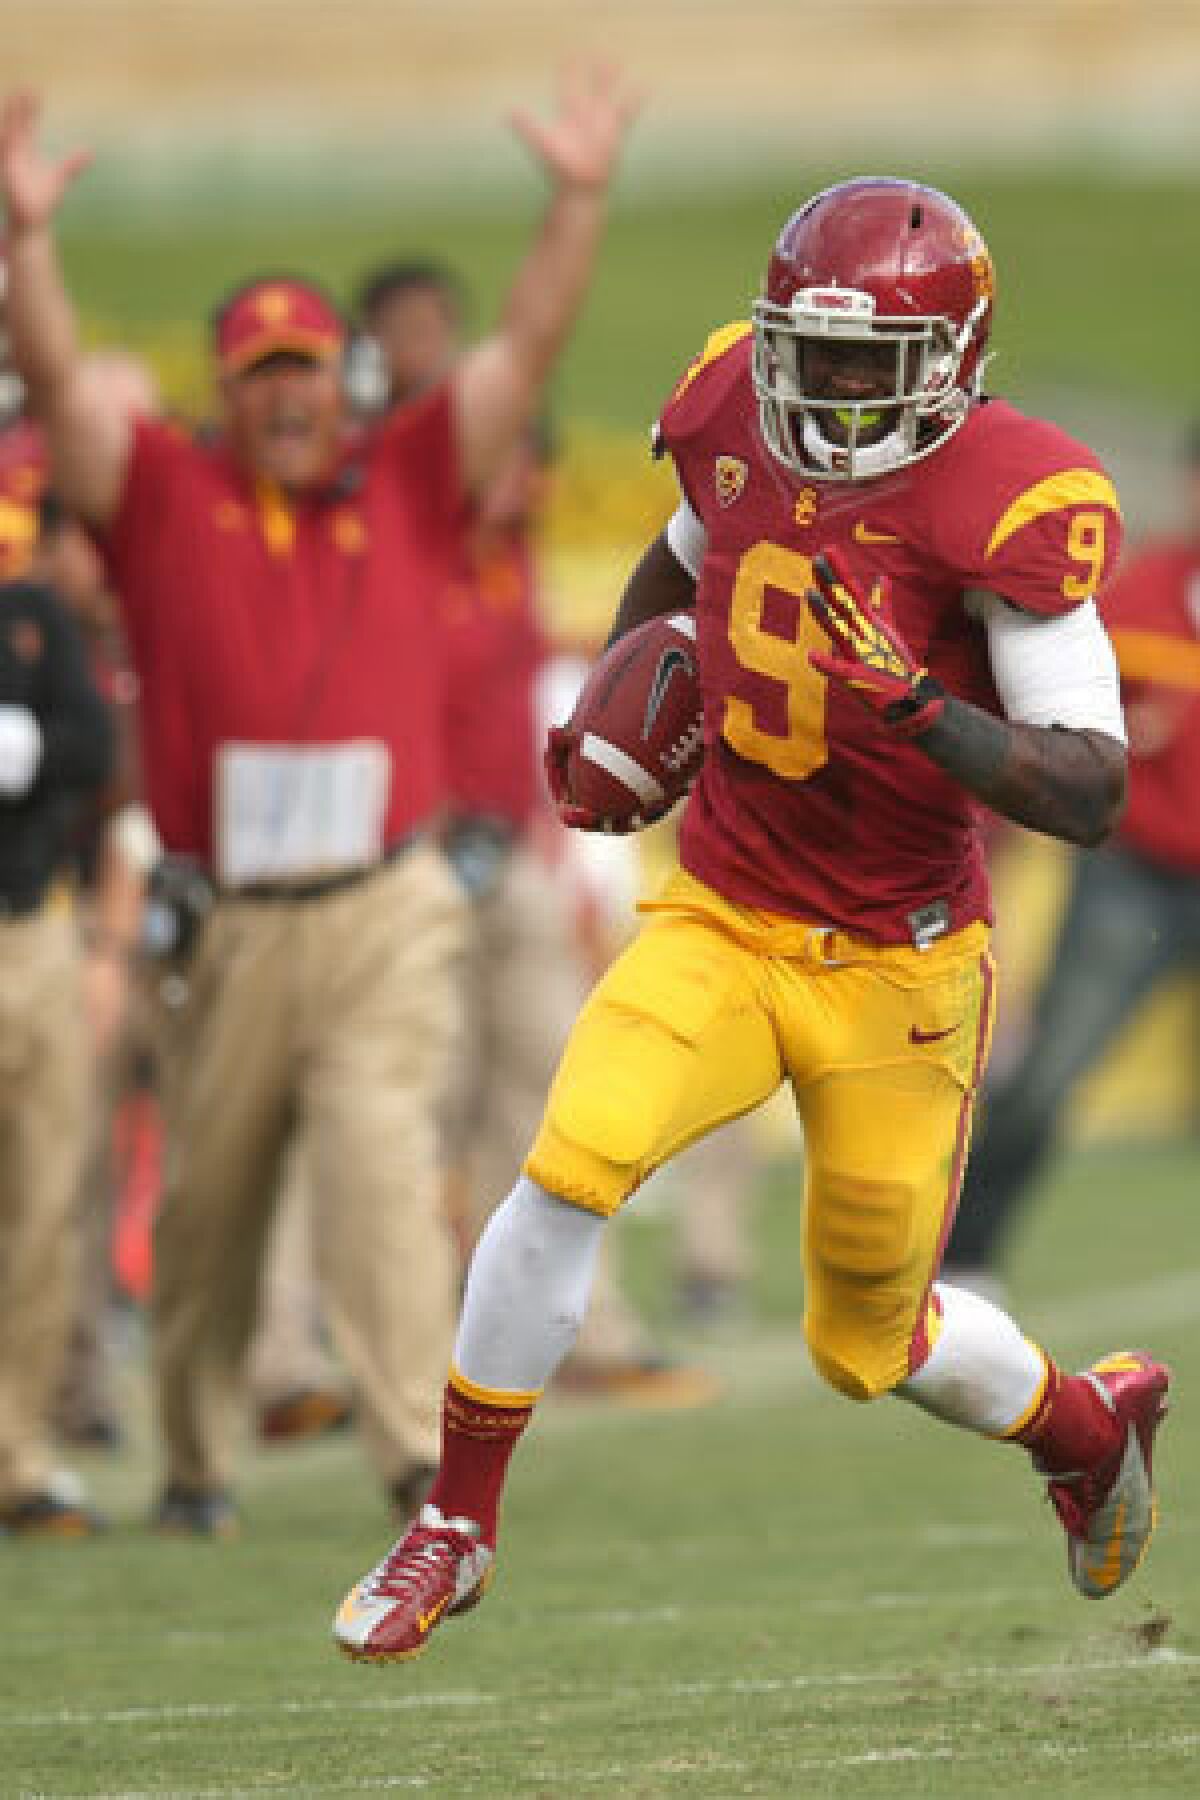 USC's Marqise Lee selected to All-America team - Los Angeles Times